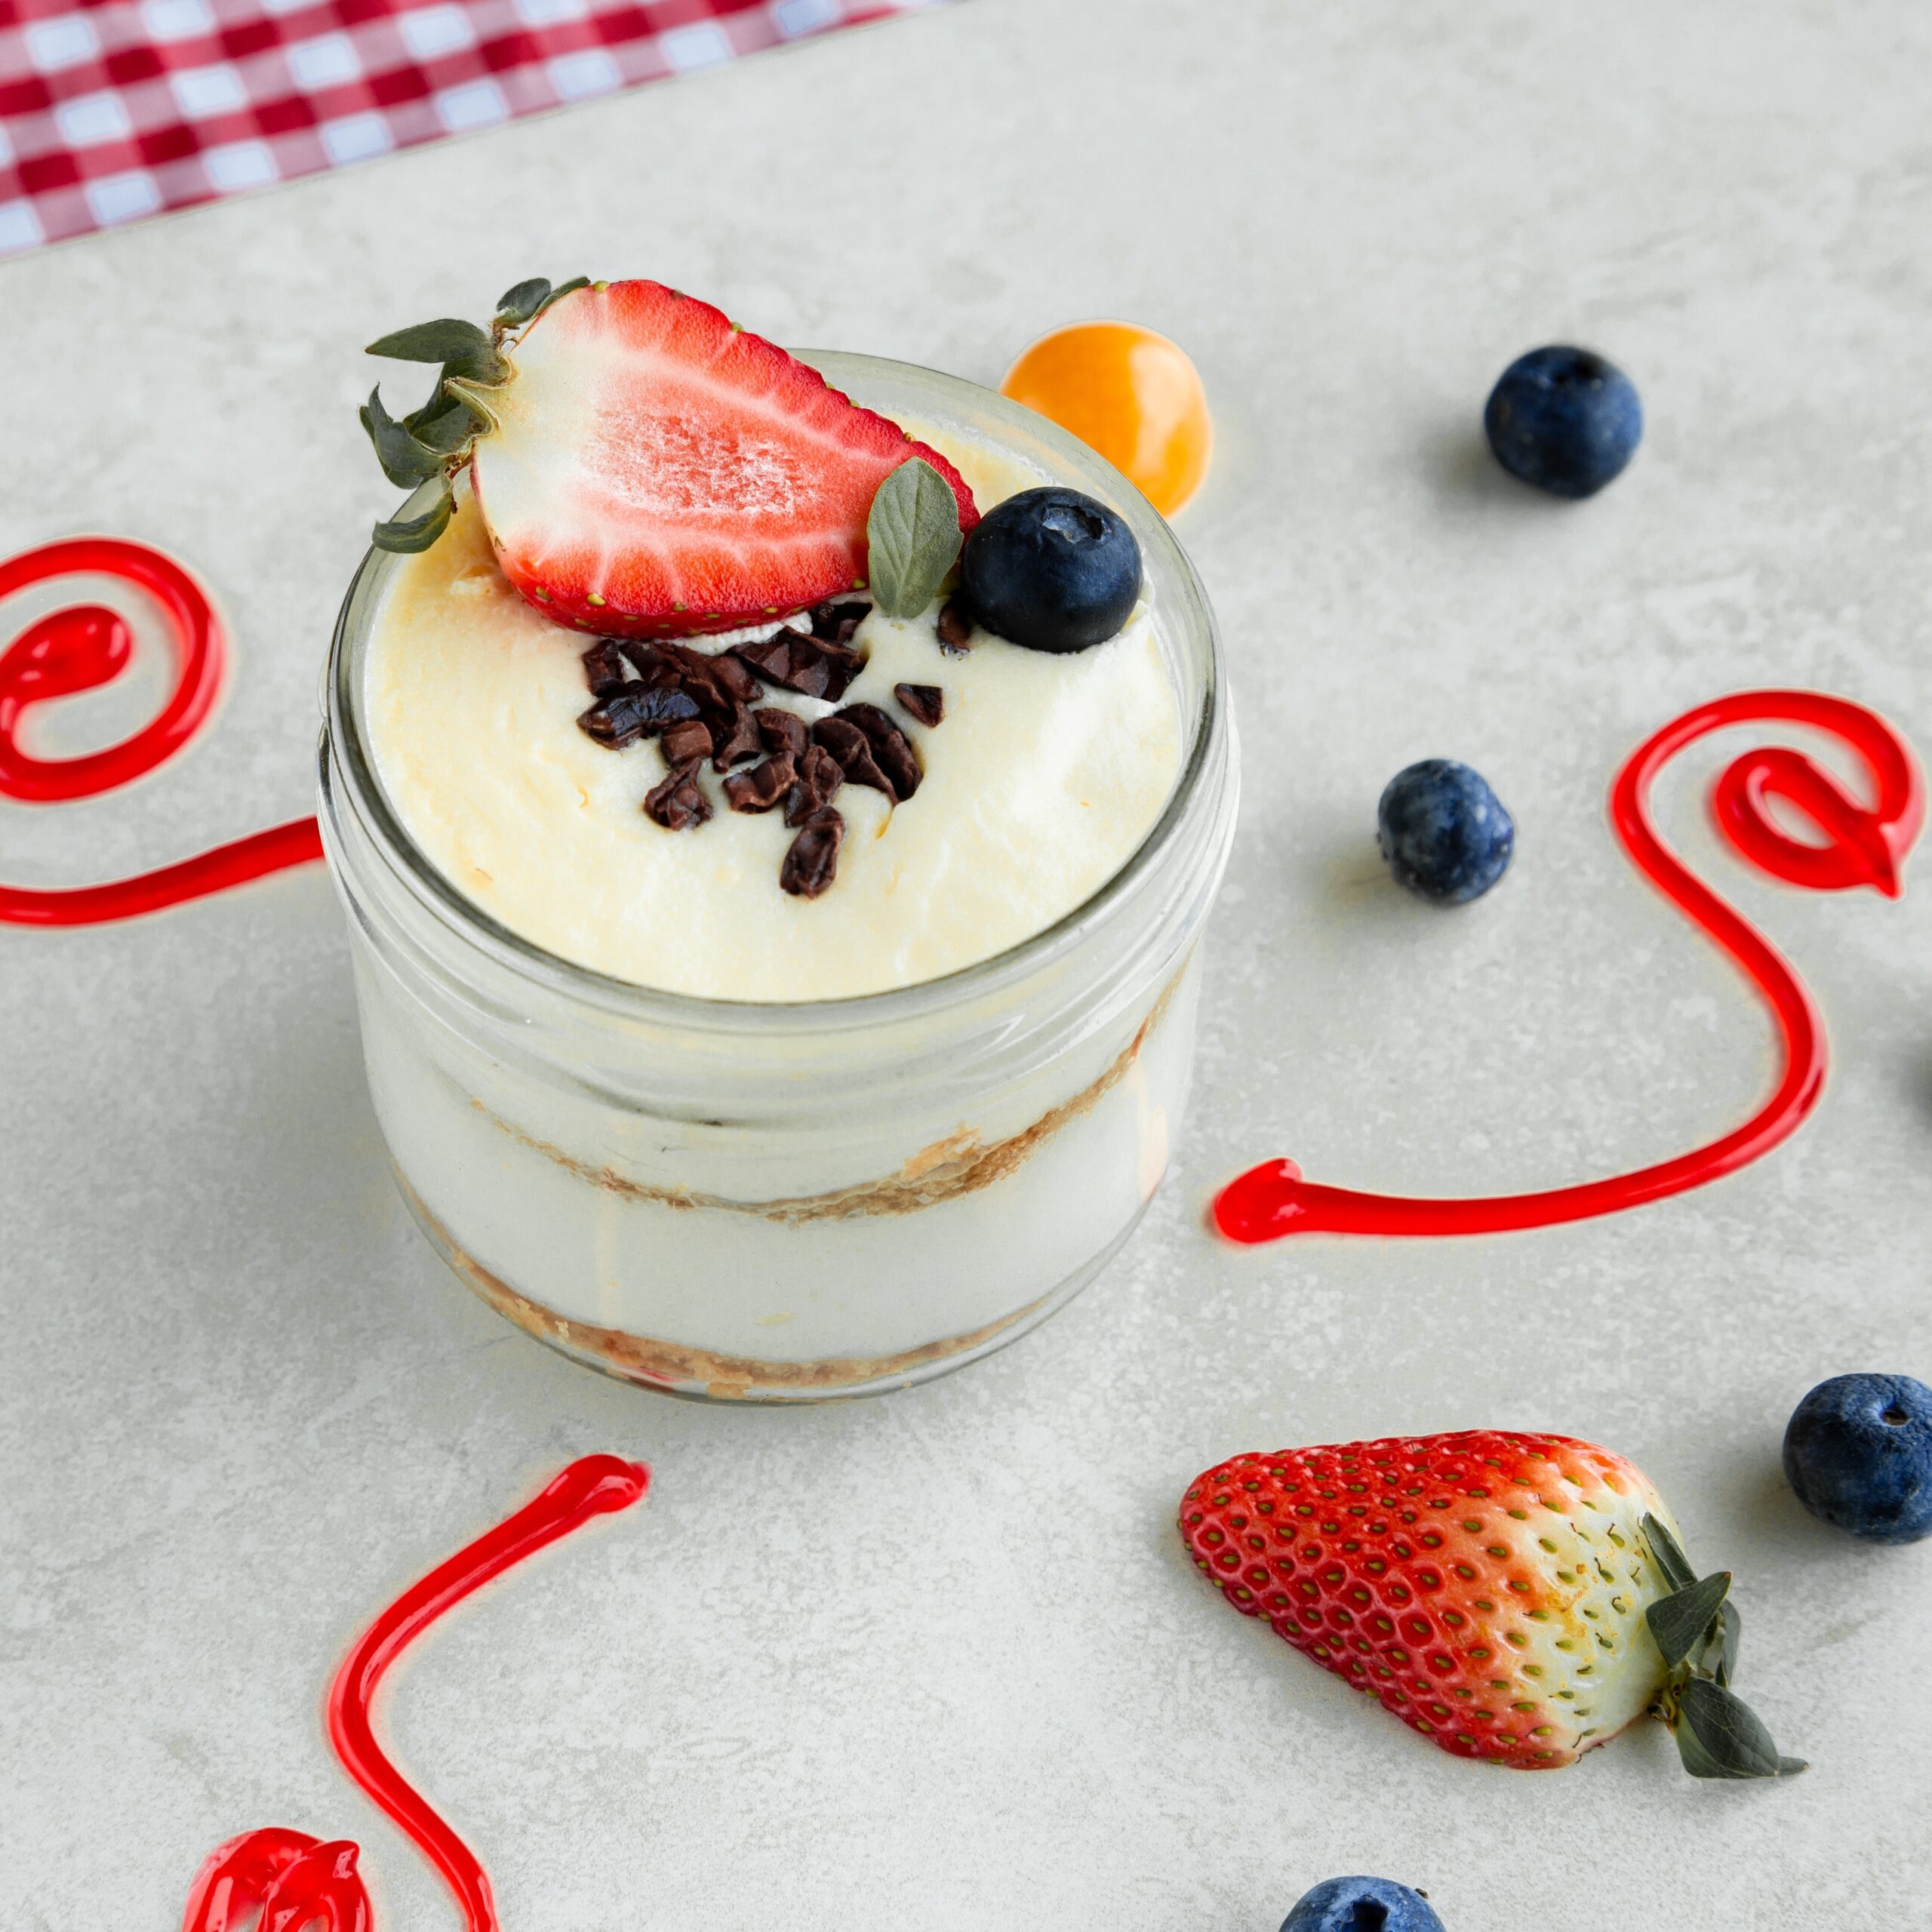 Homemade Vanilla Pudding..a Delicious Childhood Treat